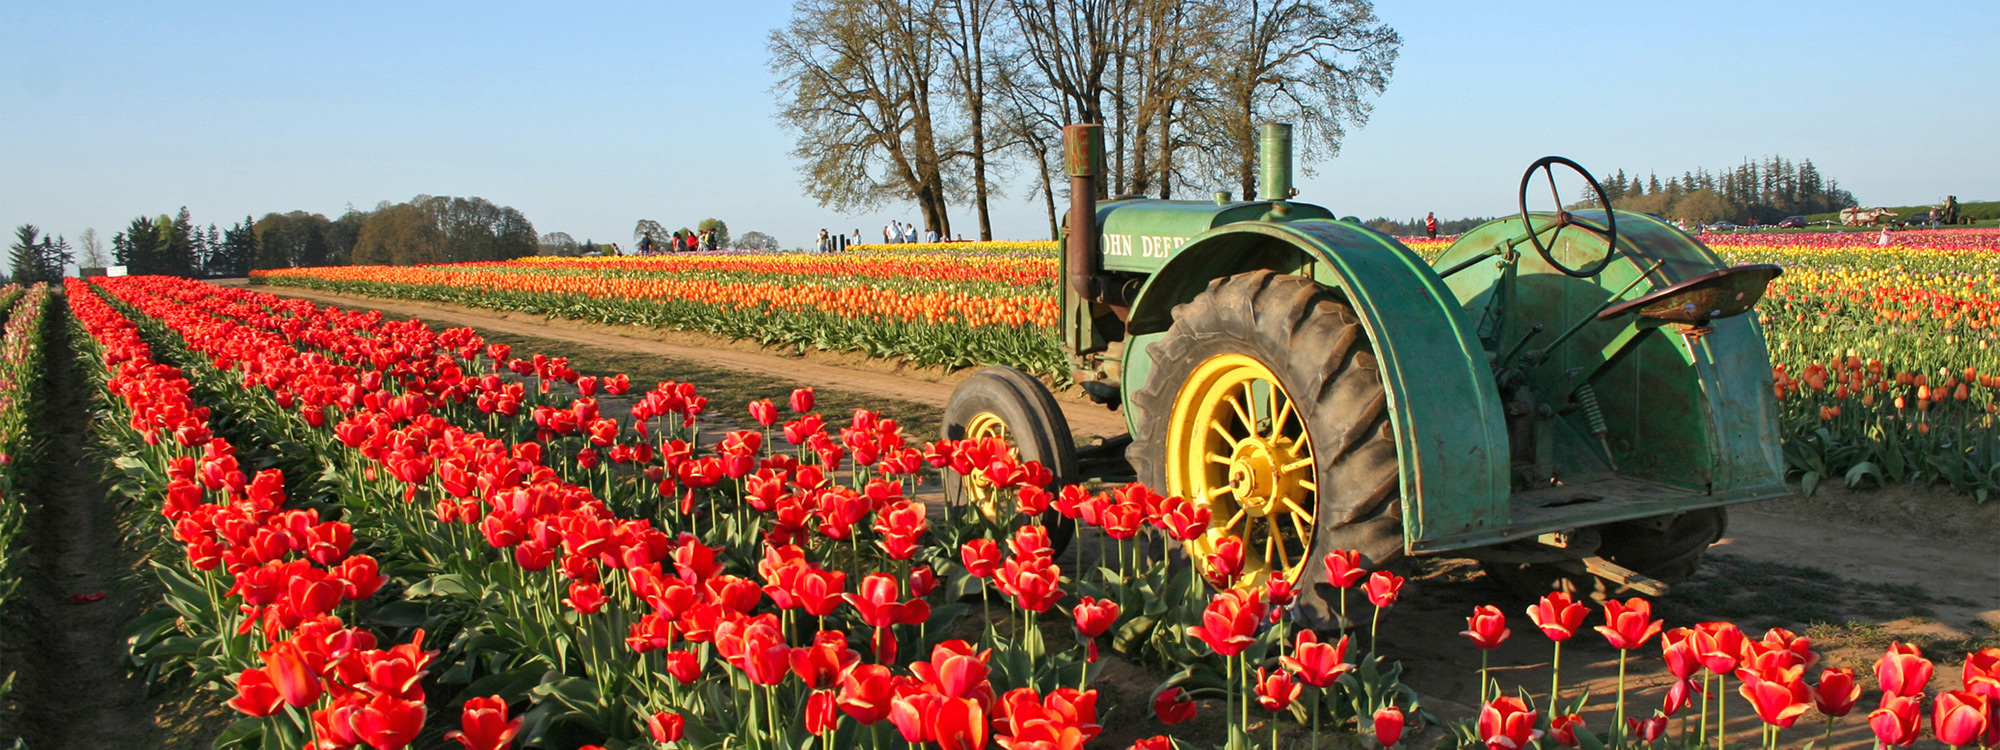 Tractor in rows of bright red tulips